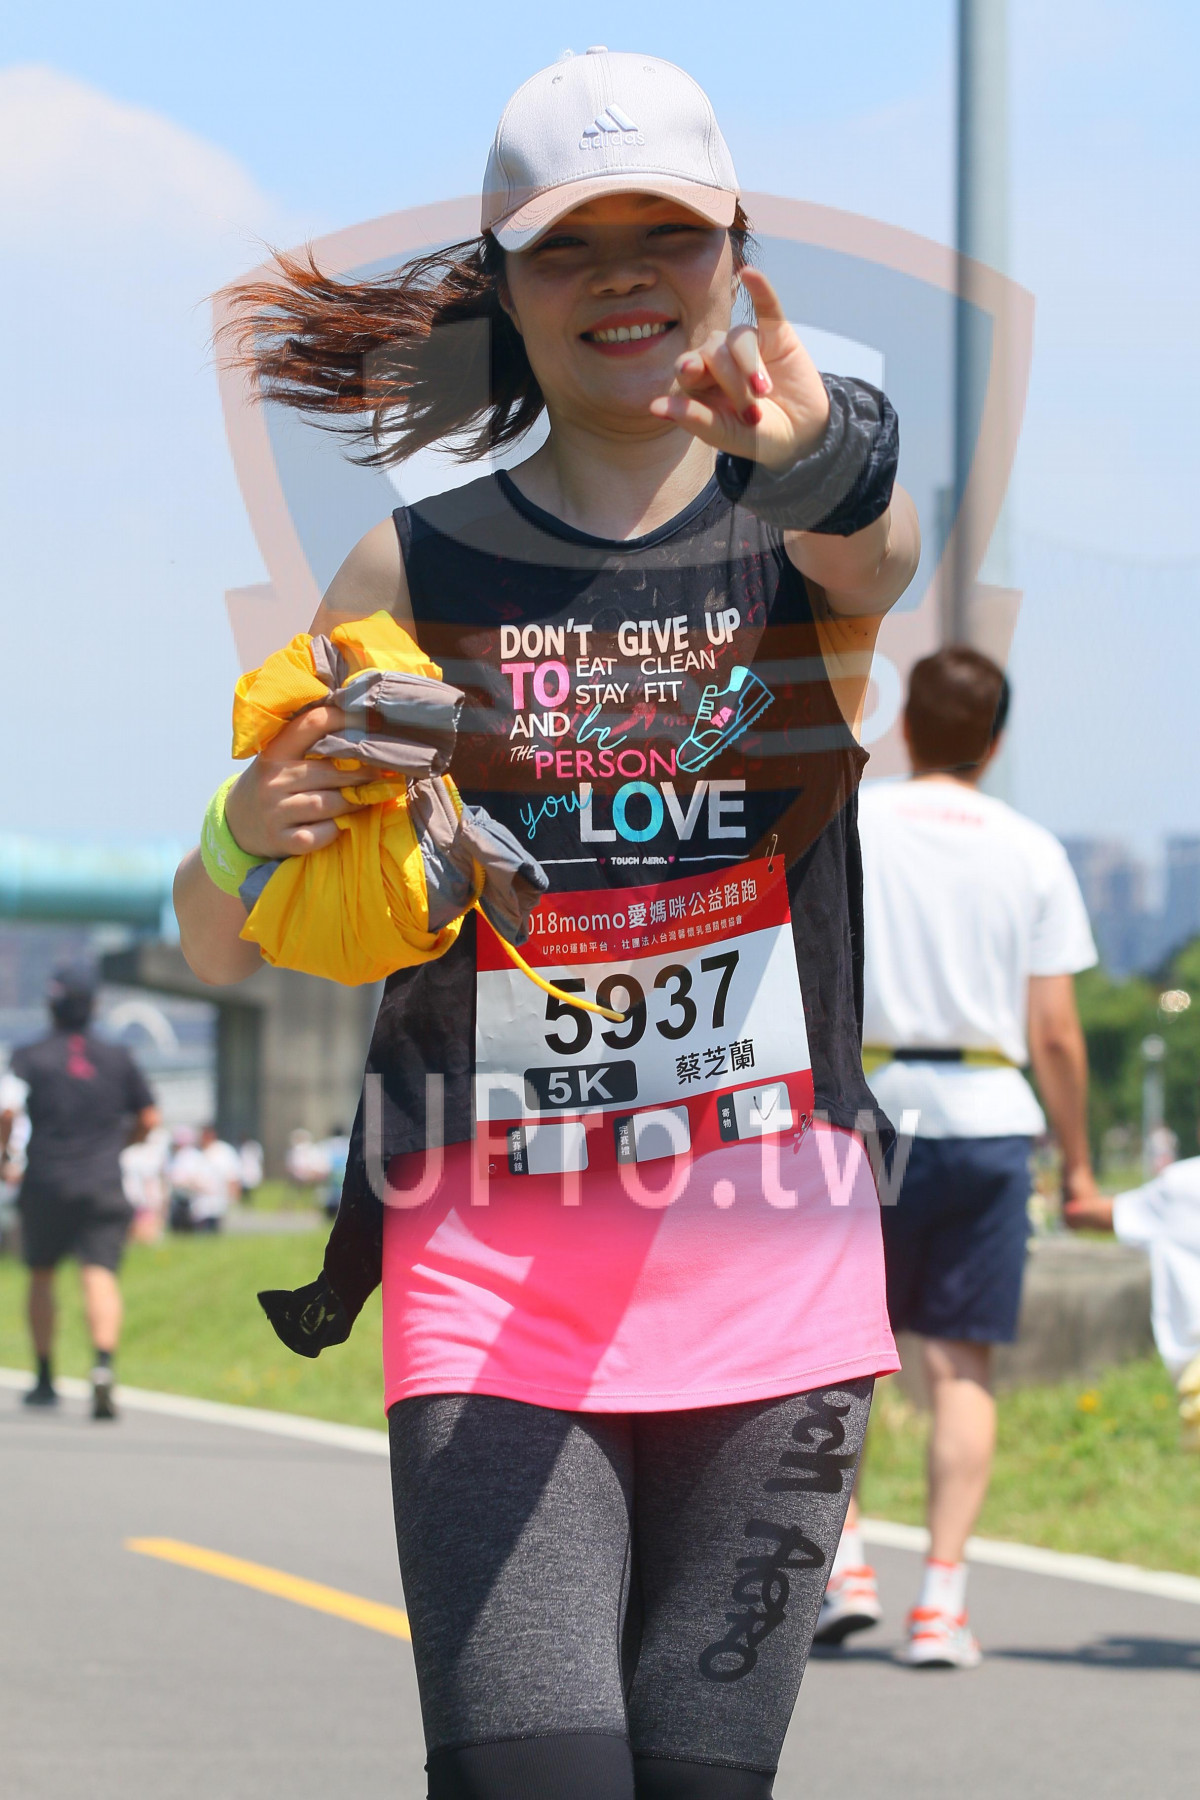 DON'T GIVE,EAT CLEAN,AY FIT,AND,THEPERŠO,と LOVE,TOUGH AMRO.,13momo,5937,,|小碧潭公園附近-7|